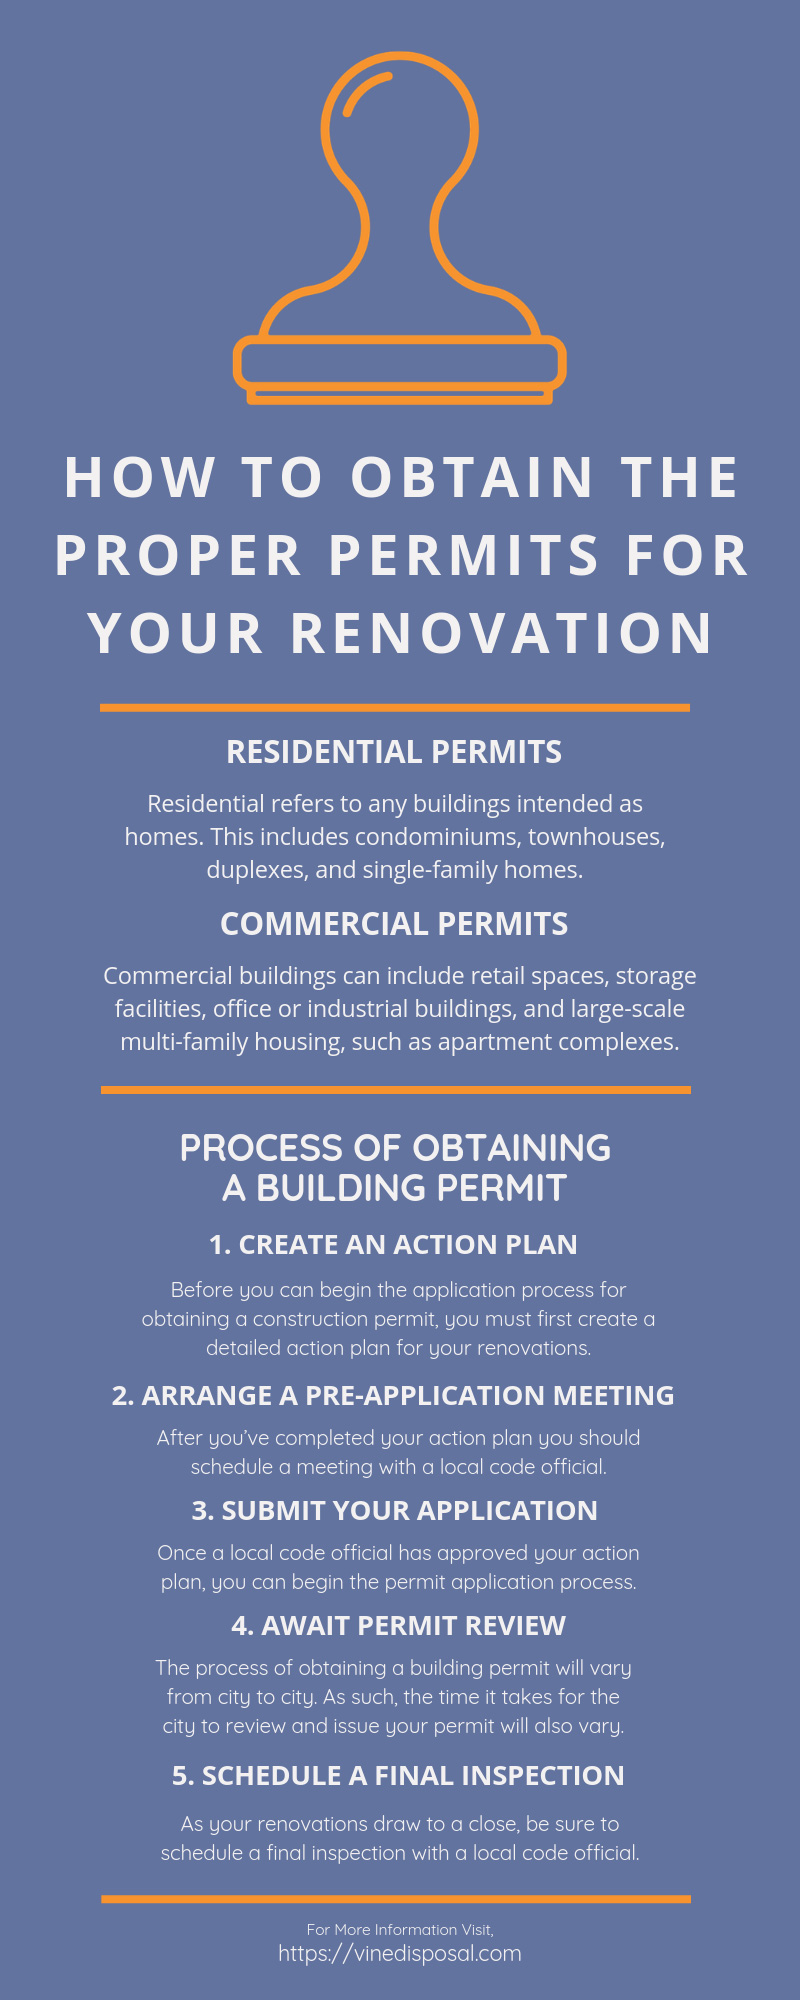 How to Obtain the Proper Permits for Your Renovation infographic